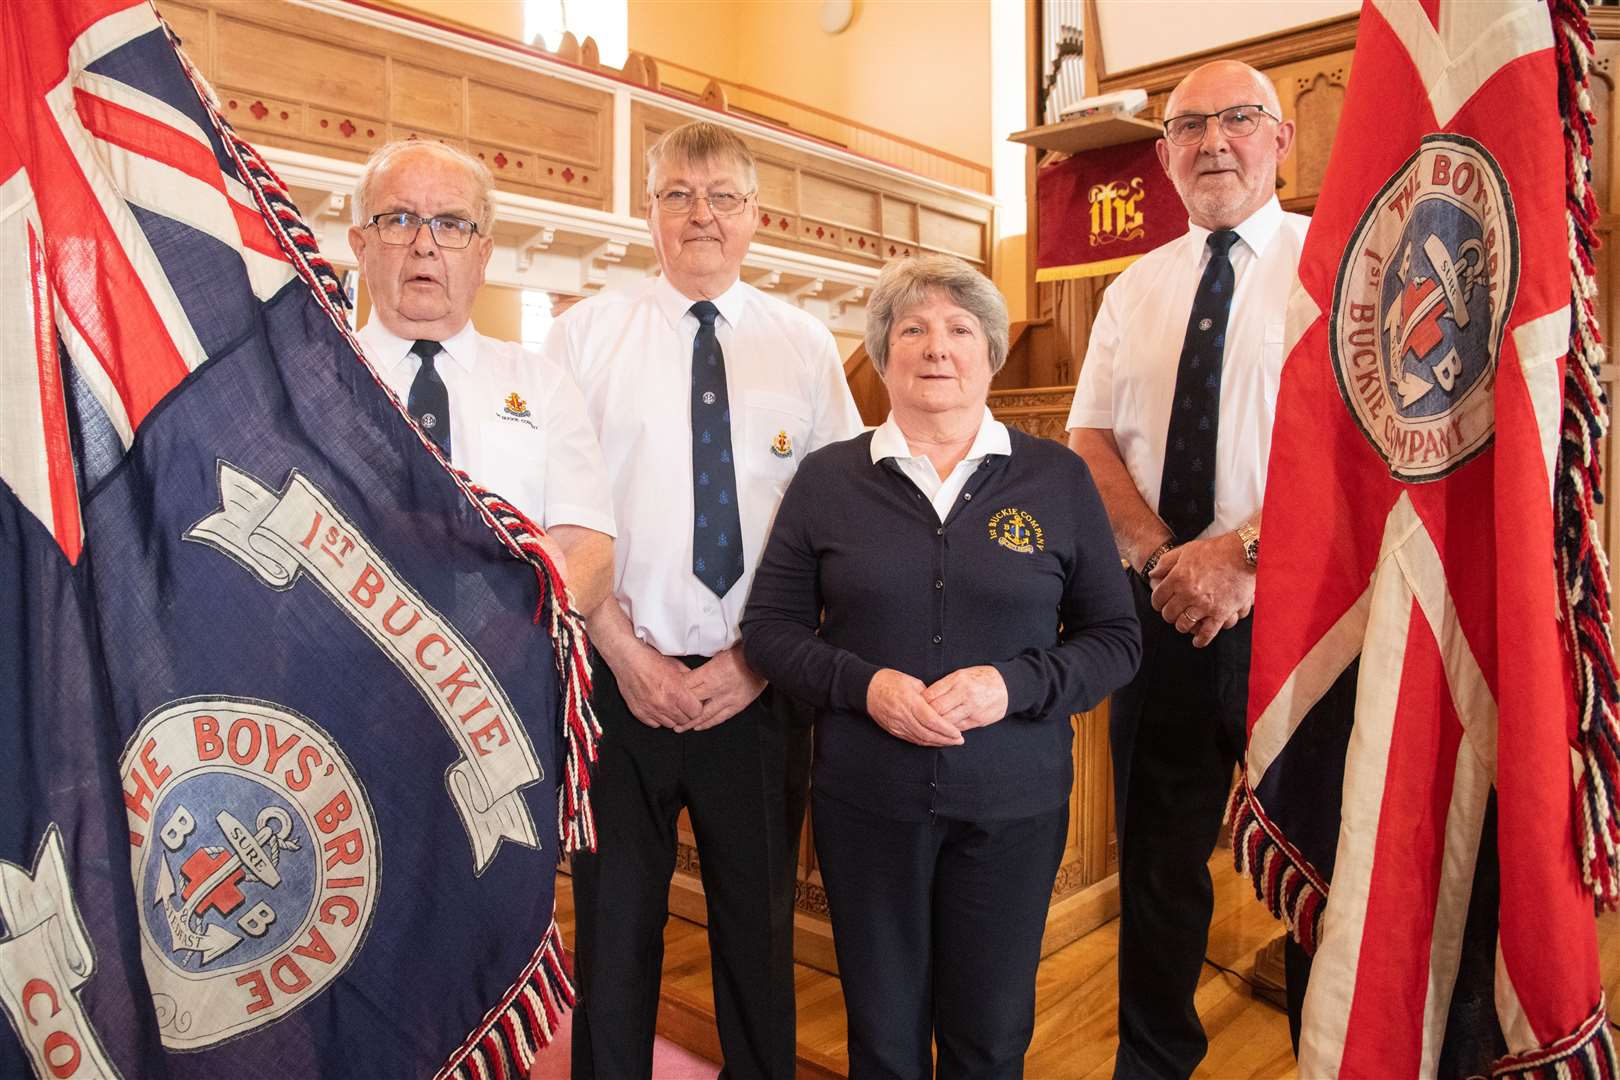 Celebrating news of the Queen's Award are 1st Buckie Company Boys' Brigade Captain Alan McIntosh (second left) and fellow officers Gordon Pirie (left), Jennifer McIntosh and Grant Stewart. Picture: Daniel Forsyth